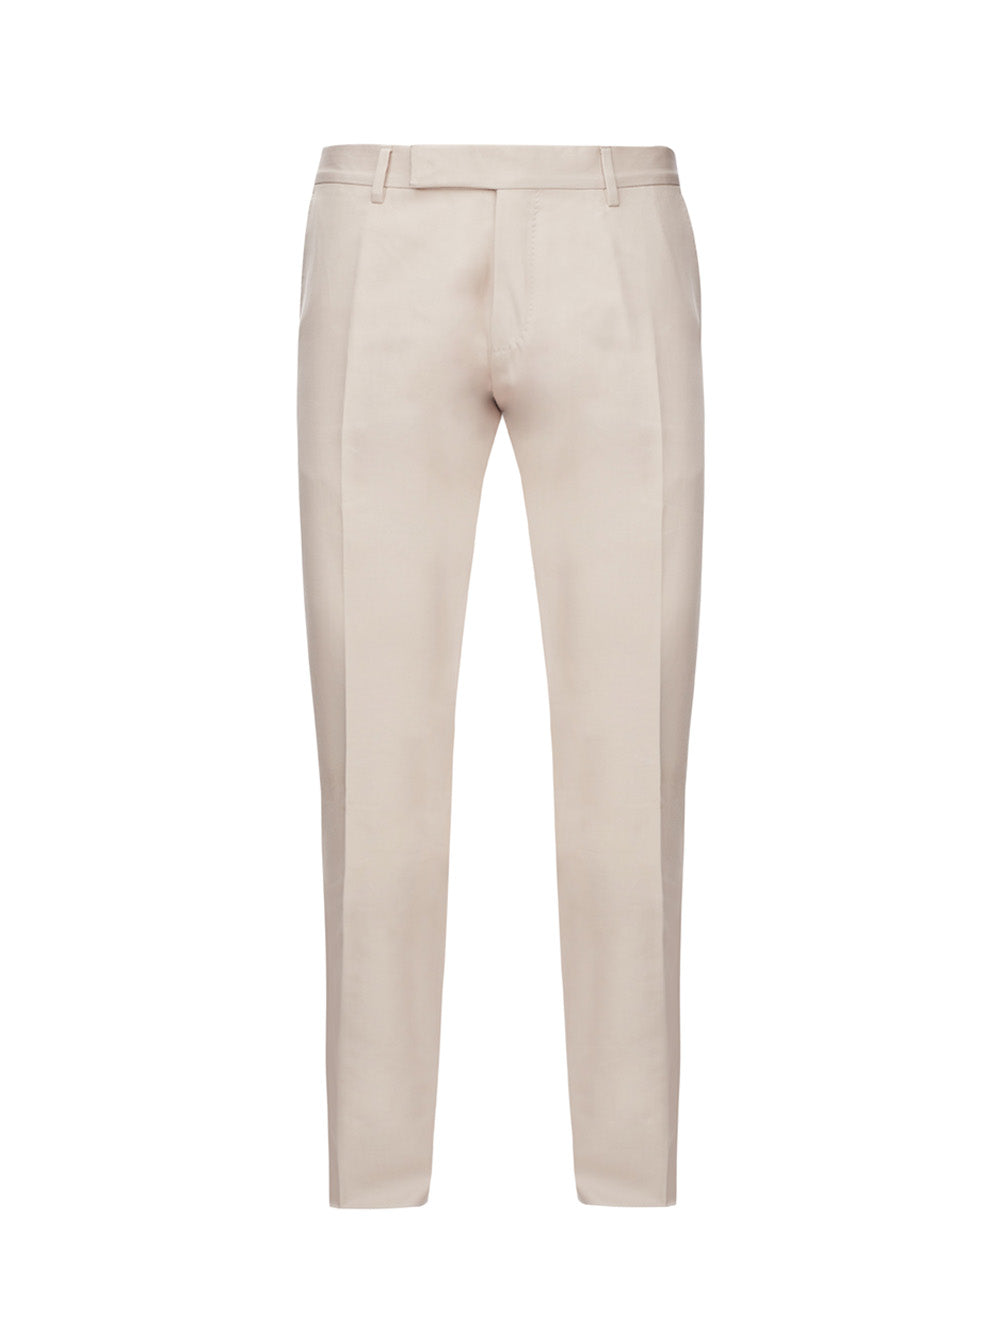 Tom Ford Beige Cotton Elegant Trousers